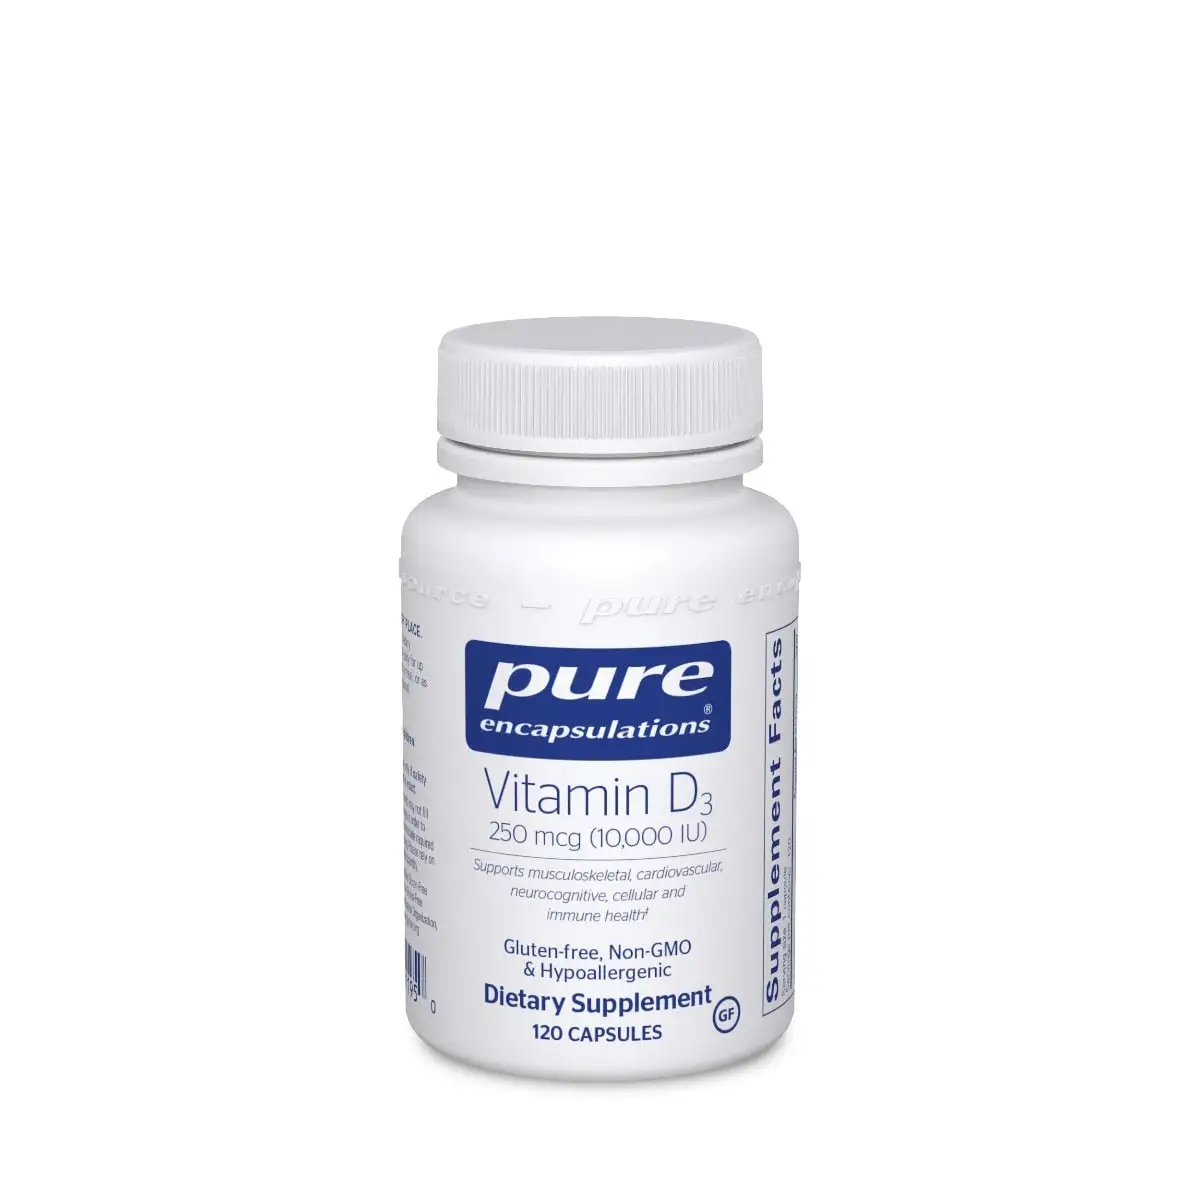 Vitamin D3 250 mcg (10,000 IU) (old price, combined with other variants)